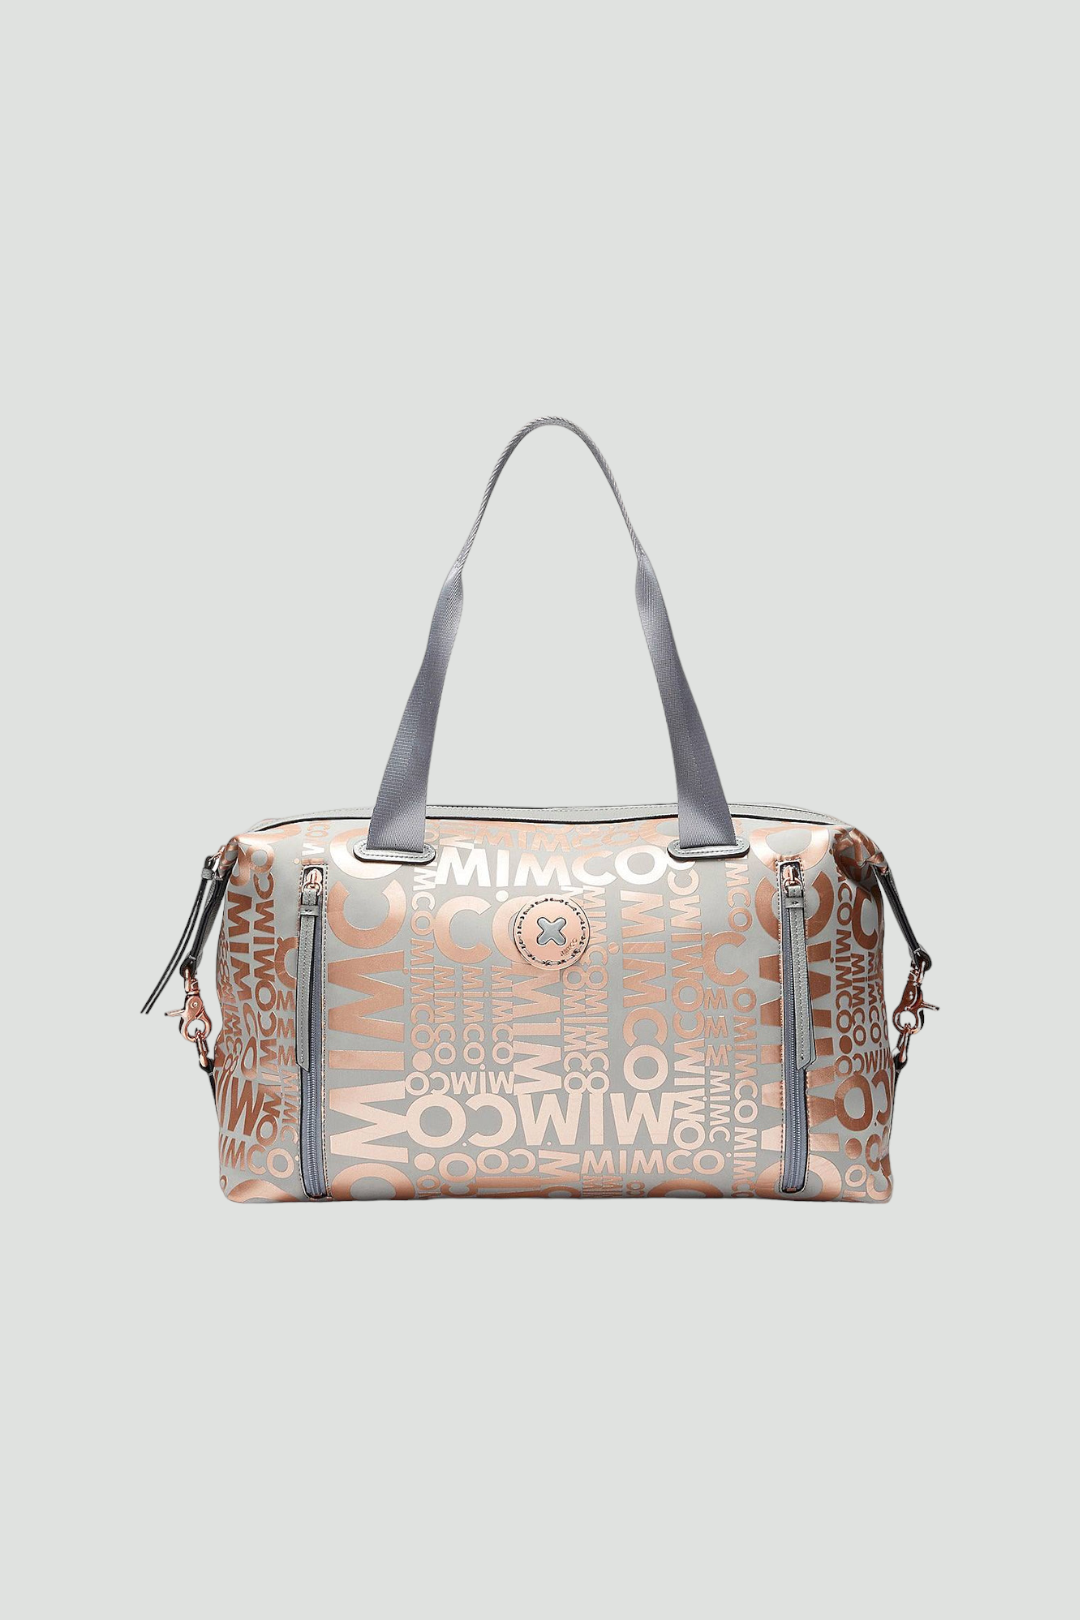 Mimco in Grey and Gold Weekender Bag